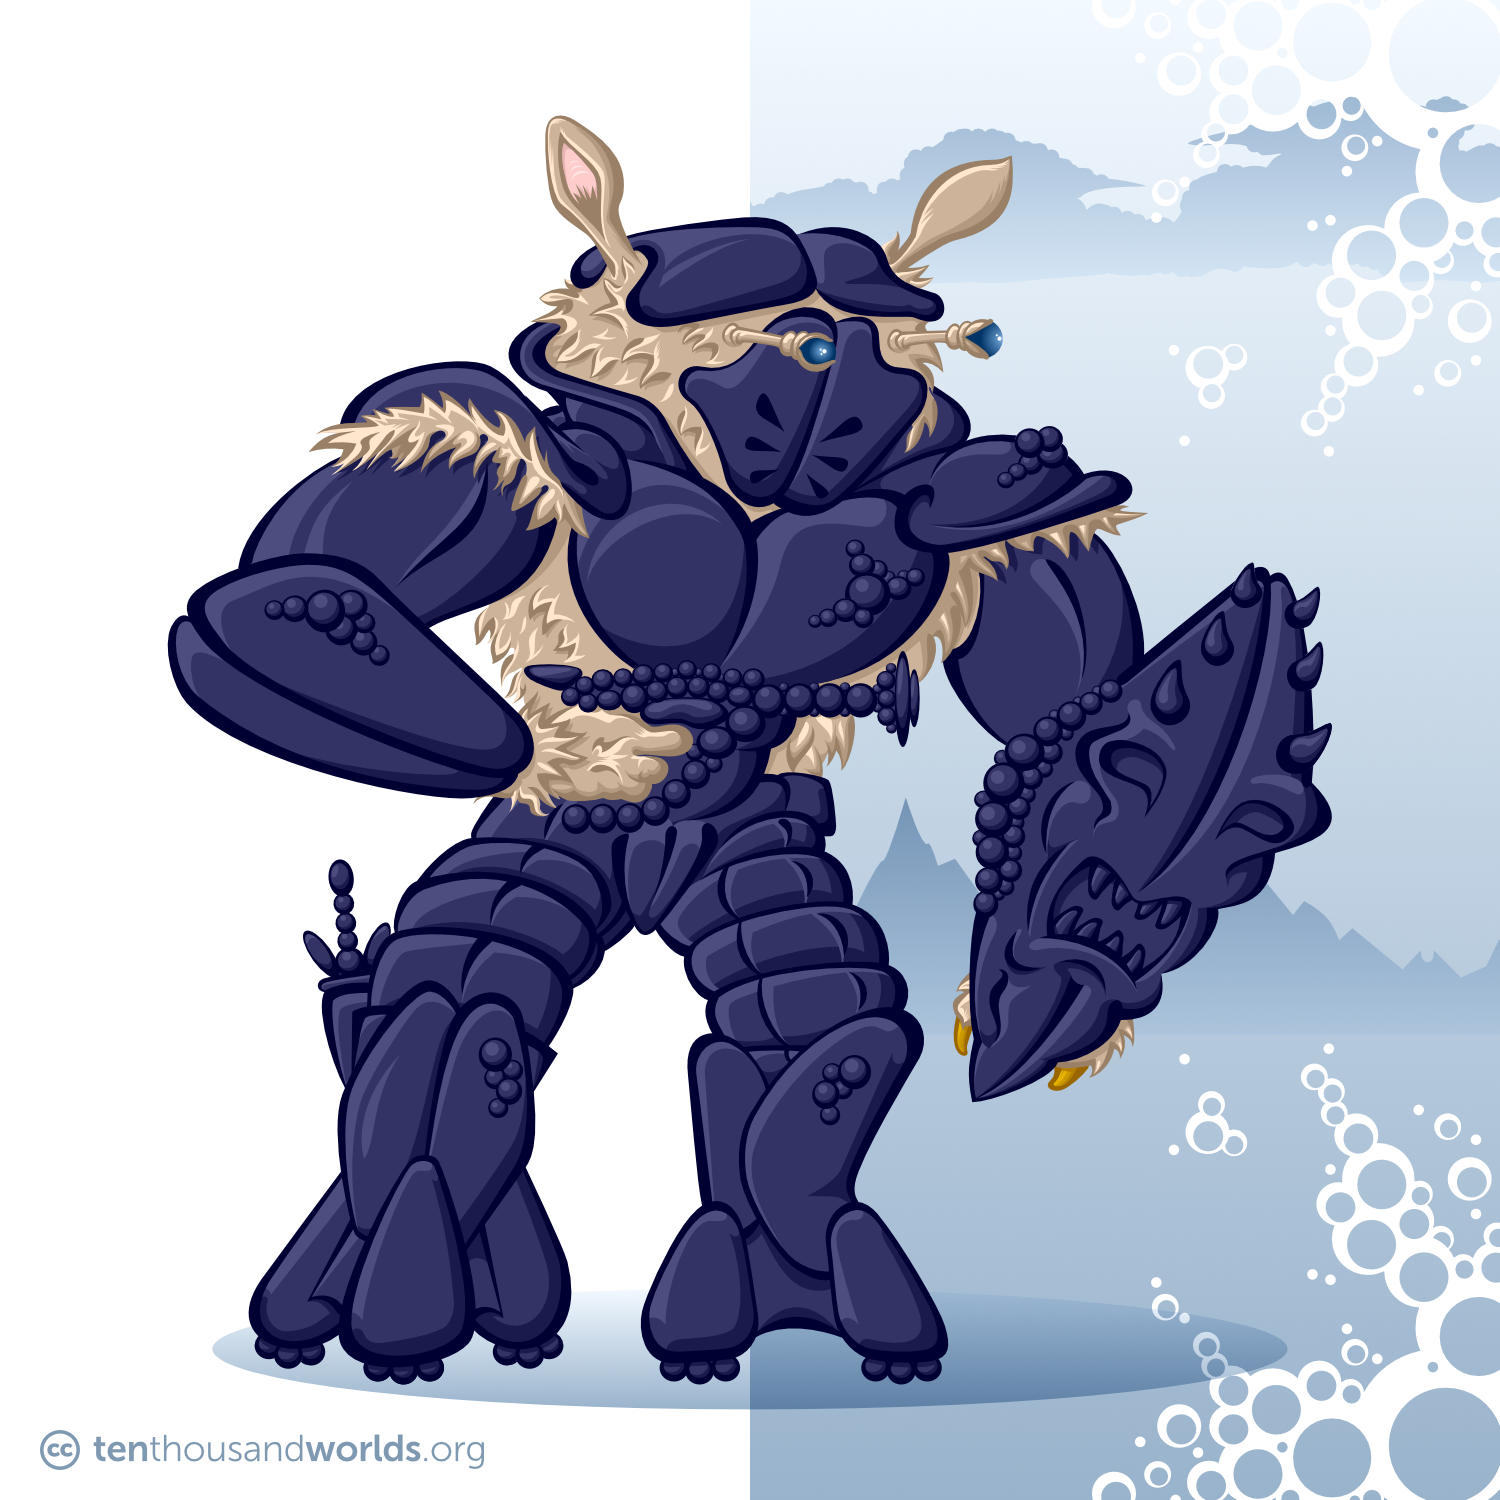 A squat, upright creature whose tan fur, twin eye-stalks, and pivoting spade-shaped ears poke out from between the plates of a blue-black crab-like suit of armor with a bubble texture. It carries a shield carved to resemble a screaming face, a boot-knife, and a pistol made from the same material as the armor.